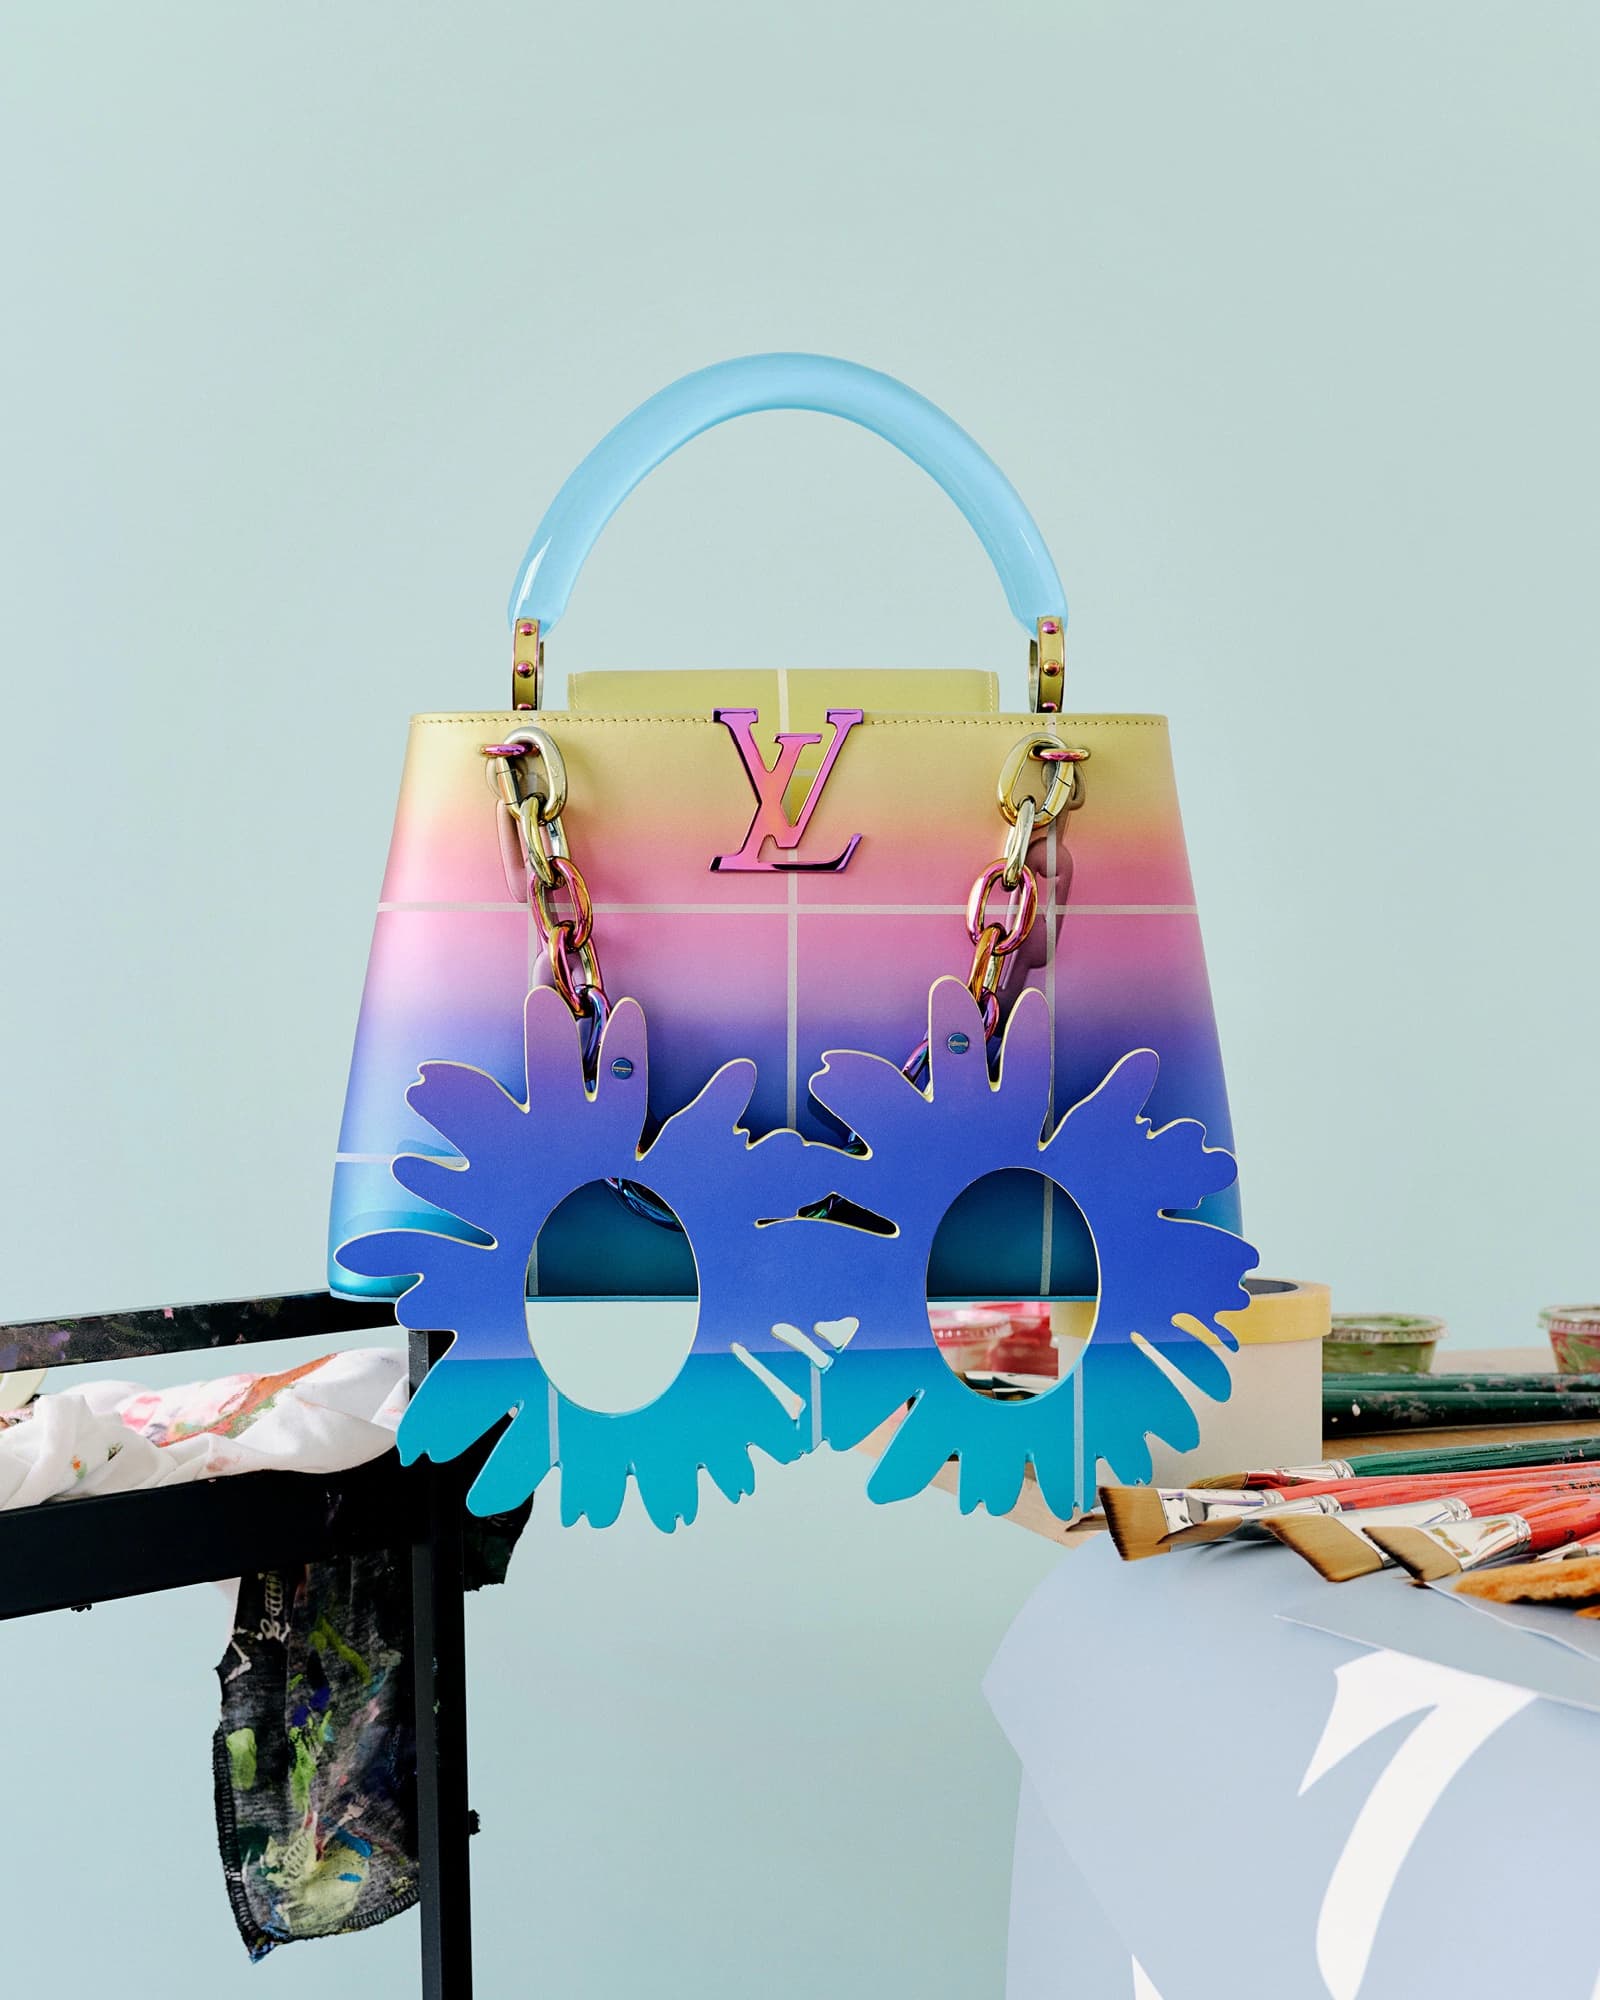 The Fourth Edition Of Louis Vuitton's Artycapucines Project Is Here